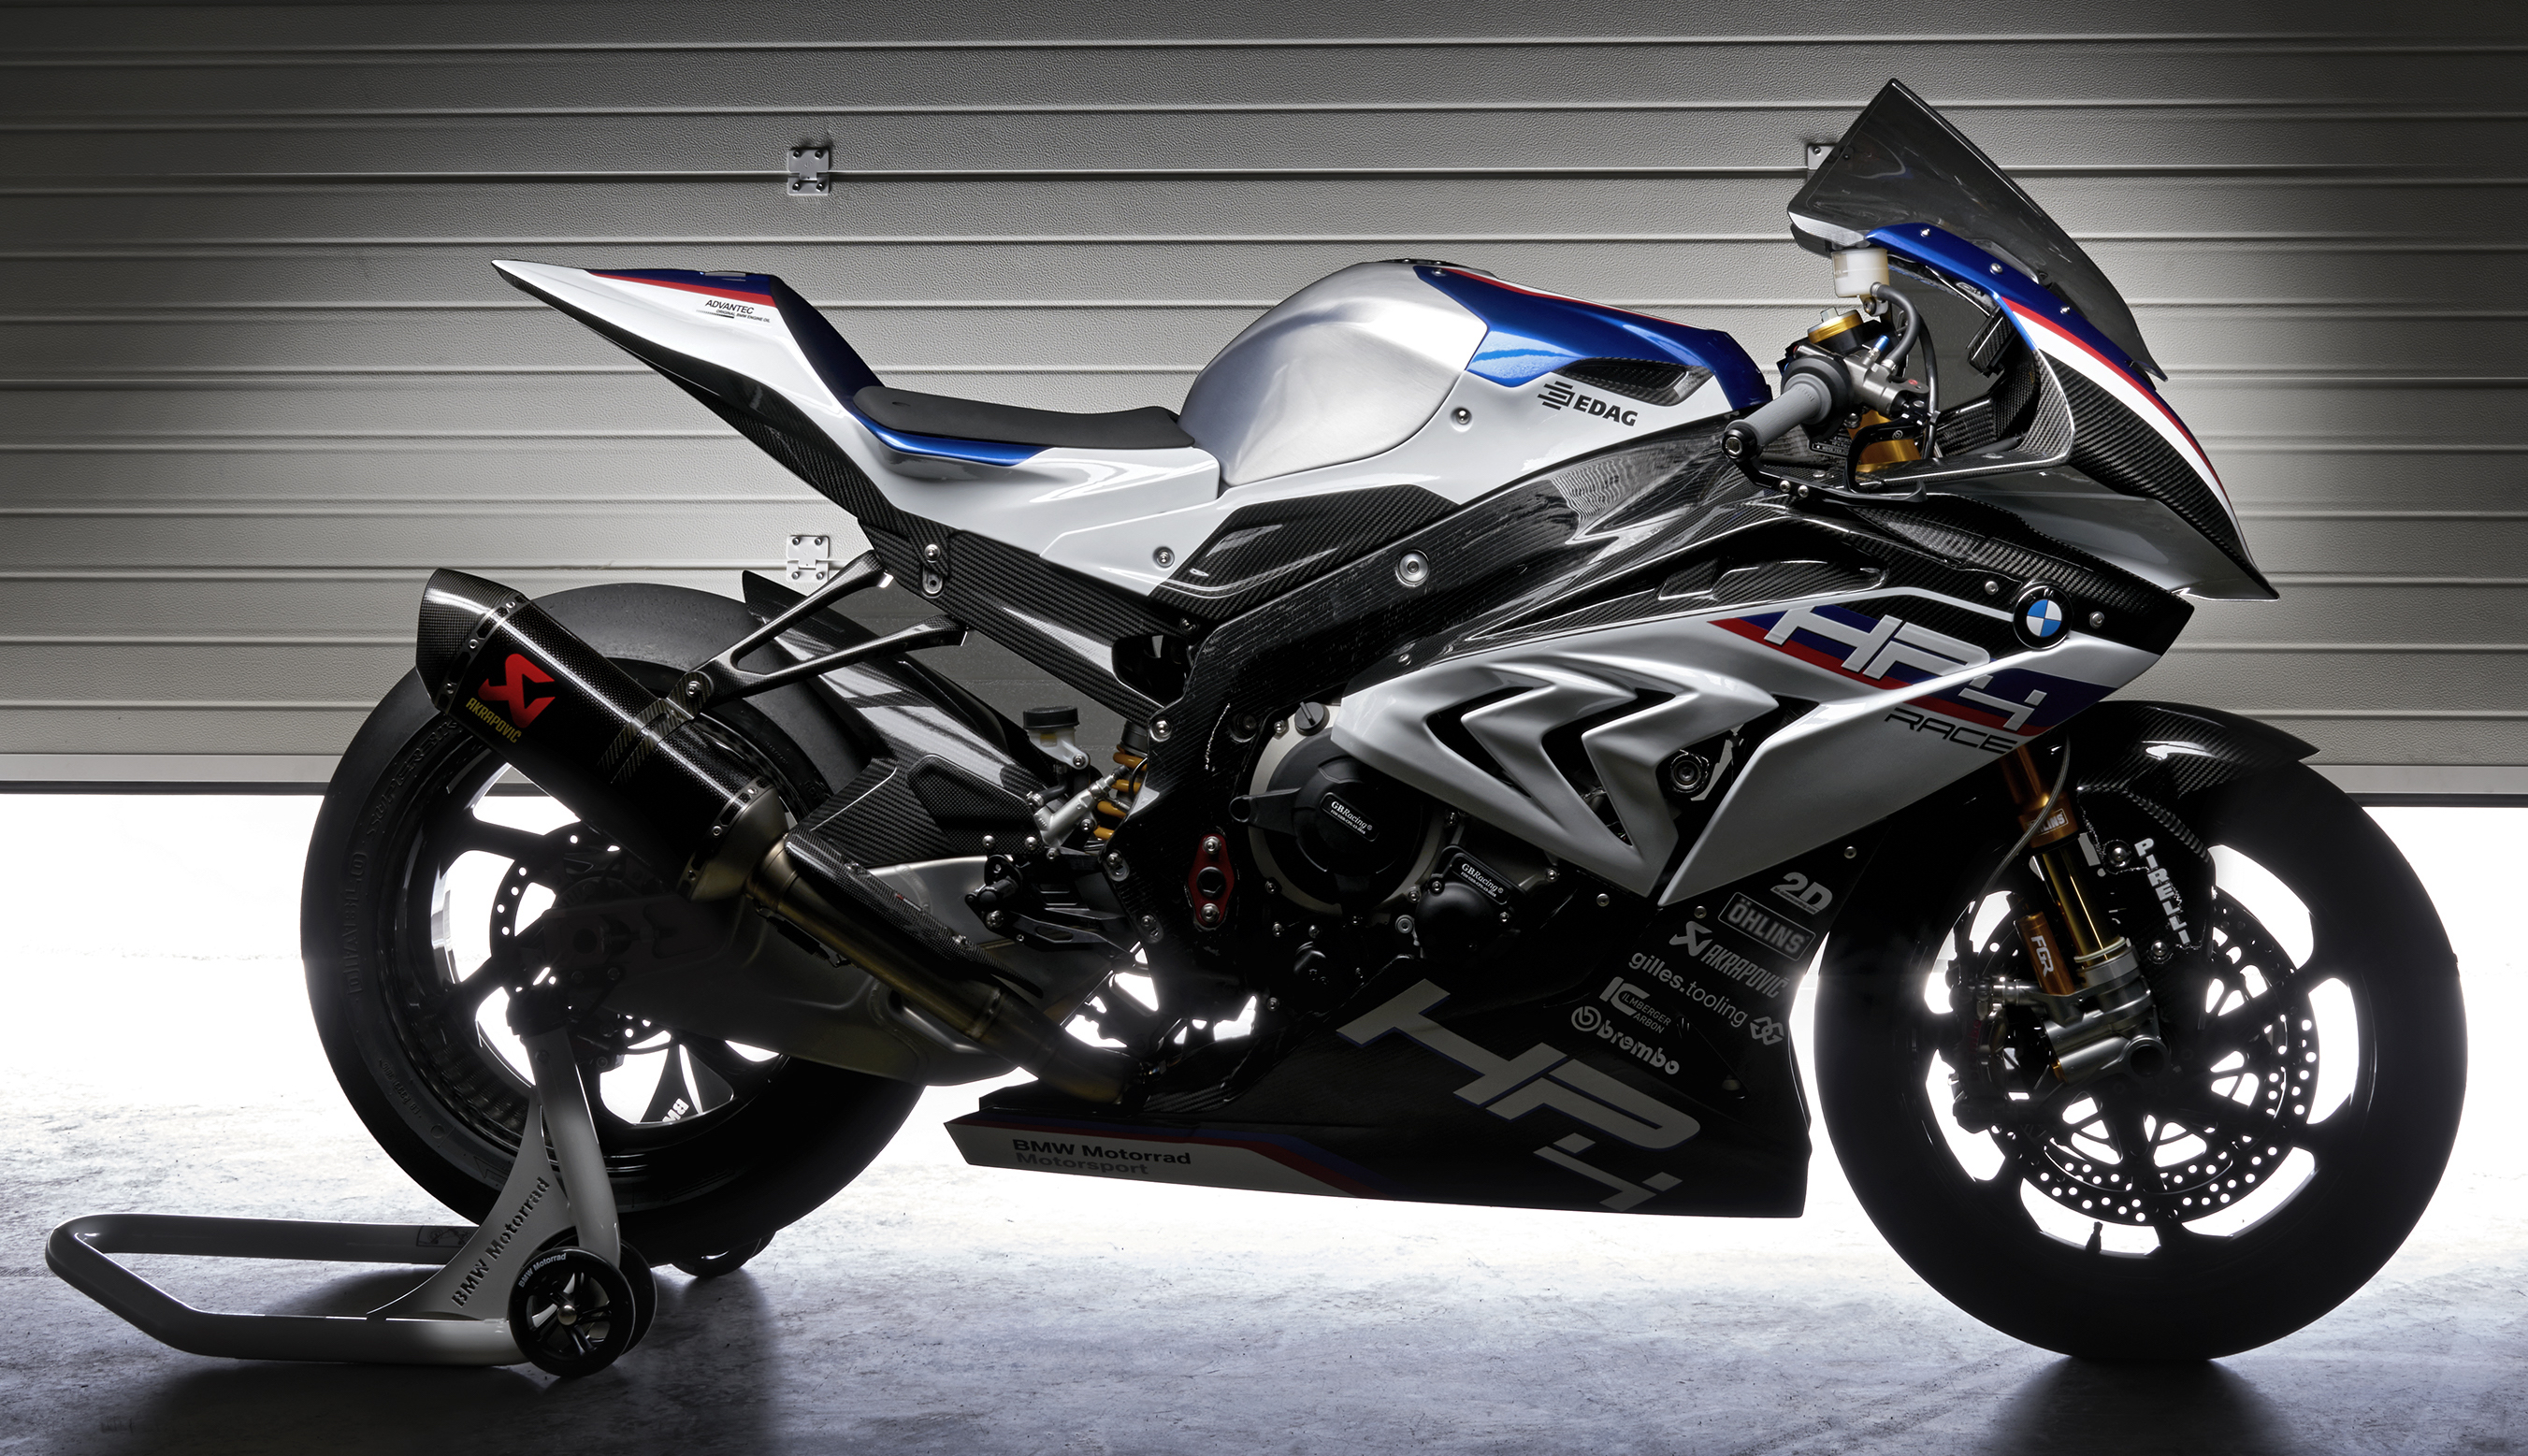 2017 BMW Motorrad HP4 Race racing motorcycle released – limited edition